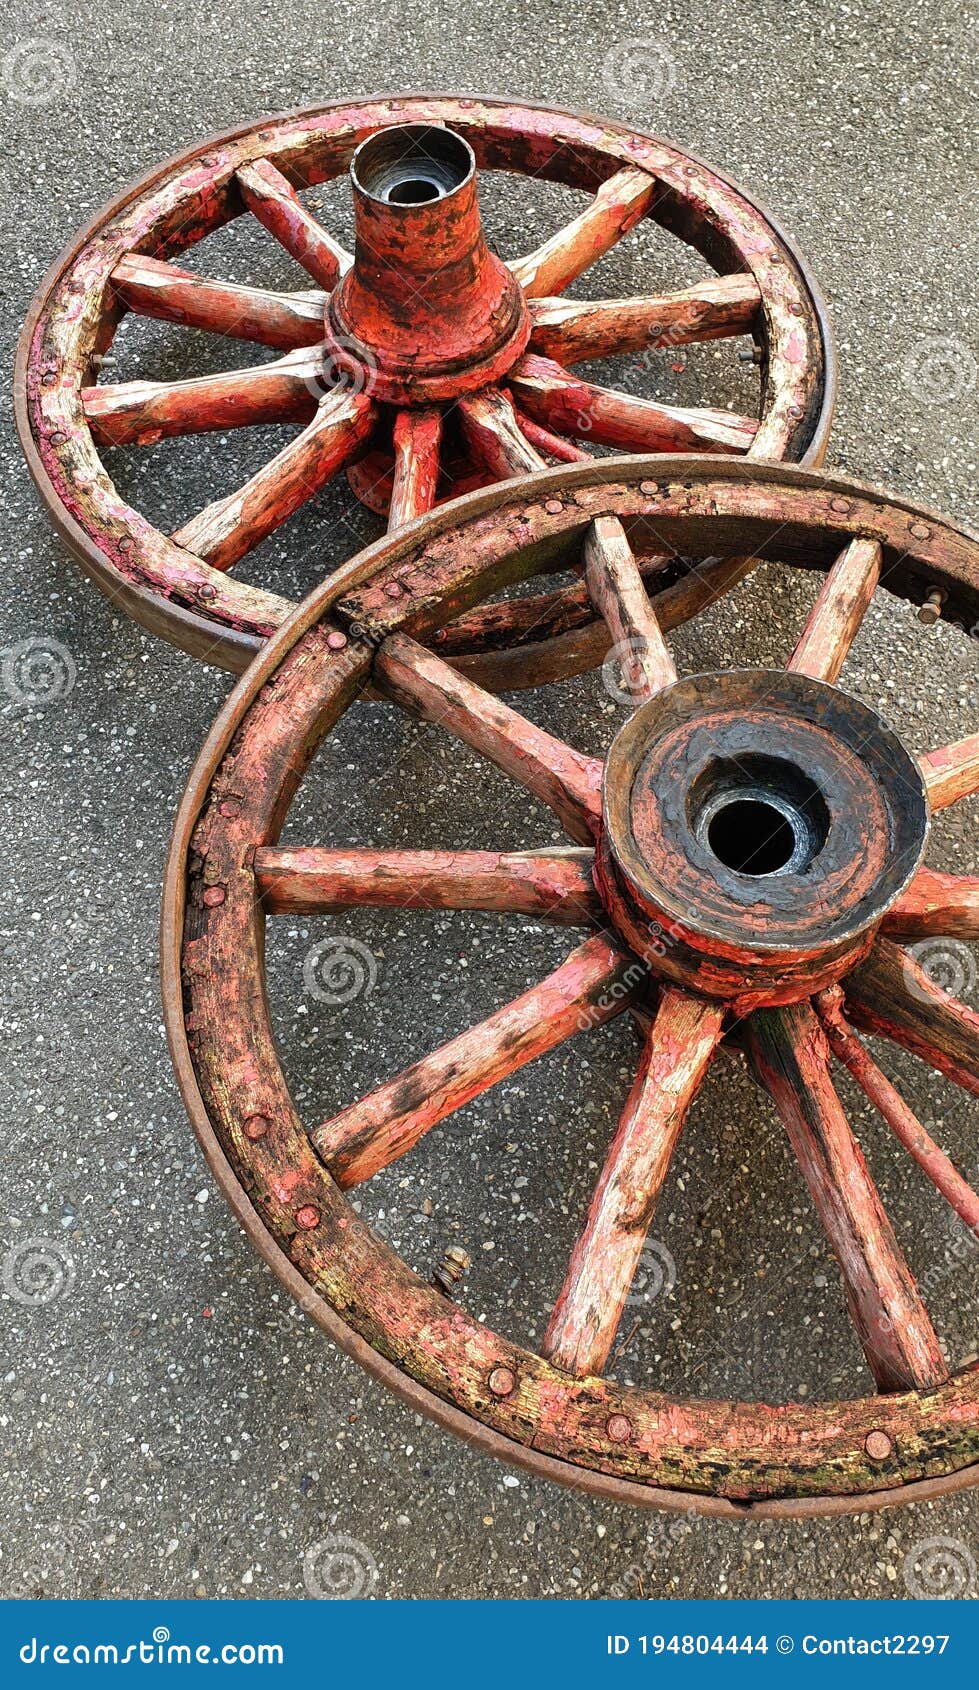 amazing engineering: 19th century wheels perfectly balanced stand upright although the wheel hubs have different geometries